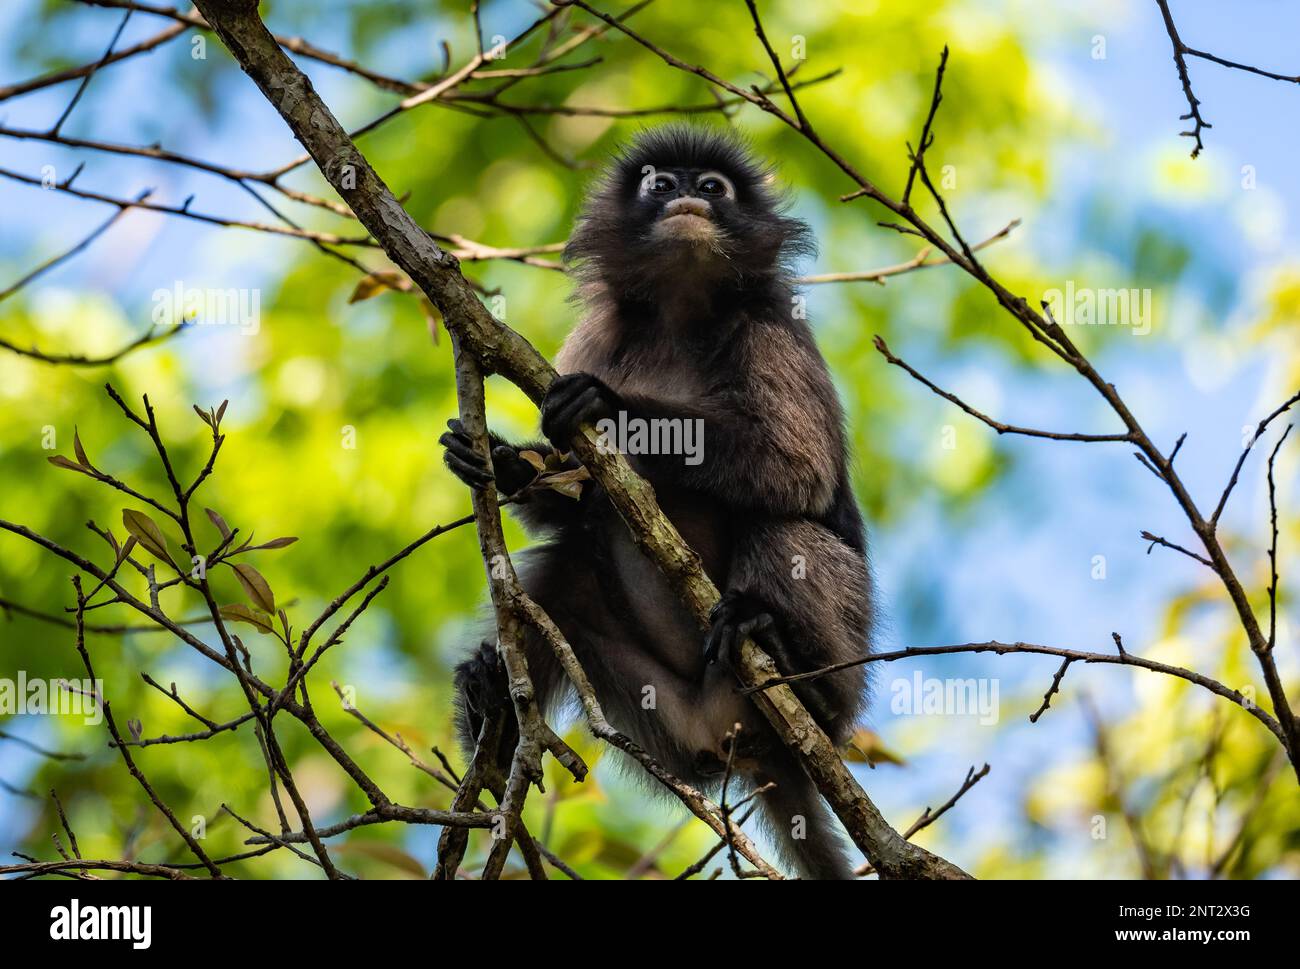 A Dusky Leaf Monkey (Trachypithecus obscurus) sitting on a branch. Thailand. Stock Photo